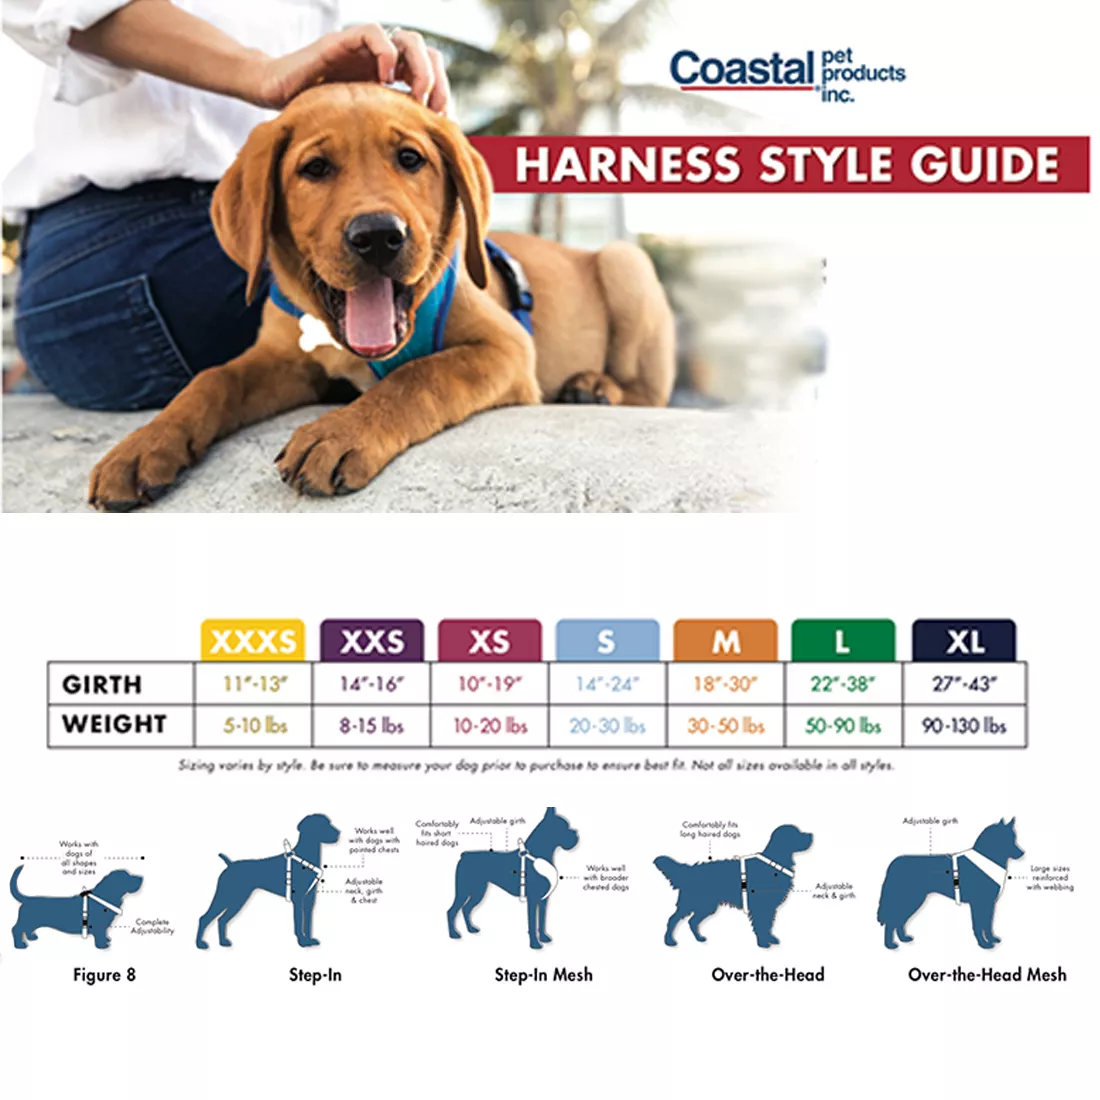 what size harness should I get for a golden retriever puppy?